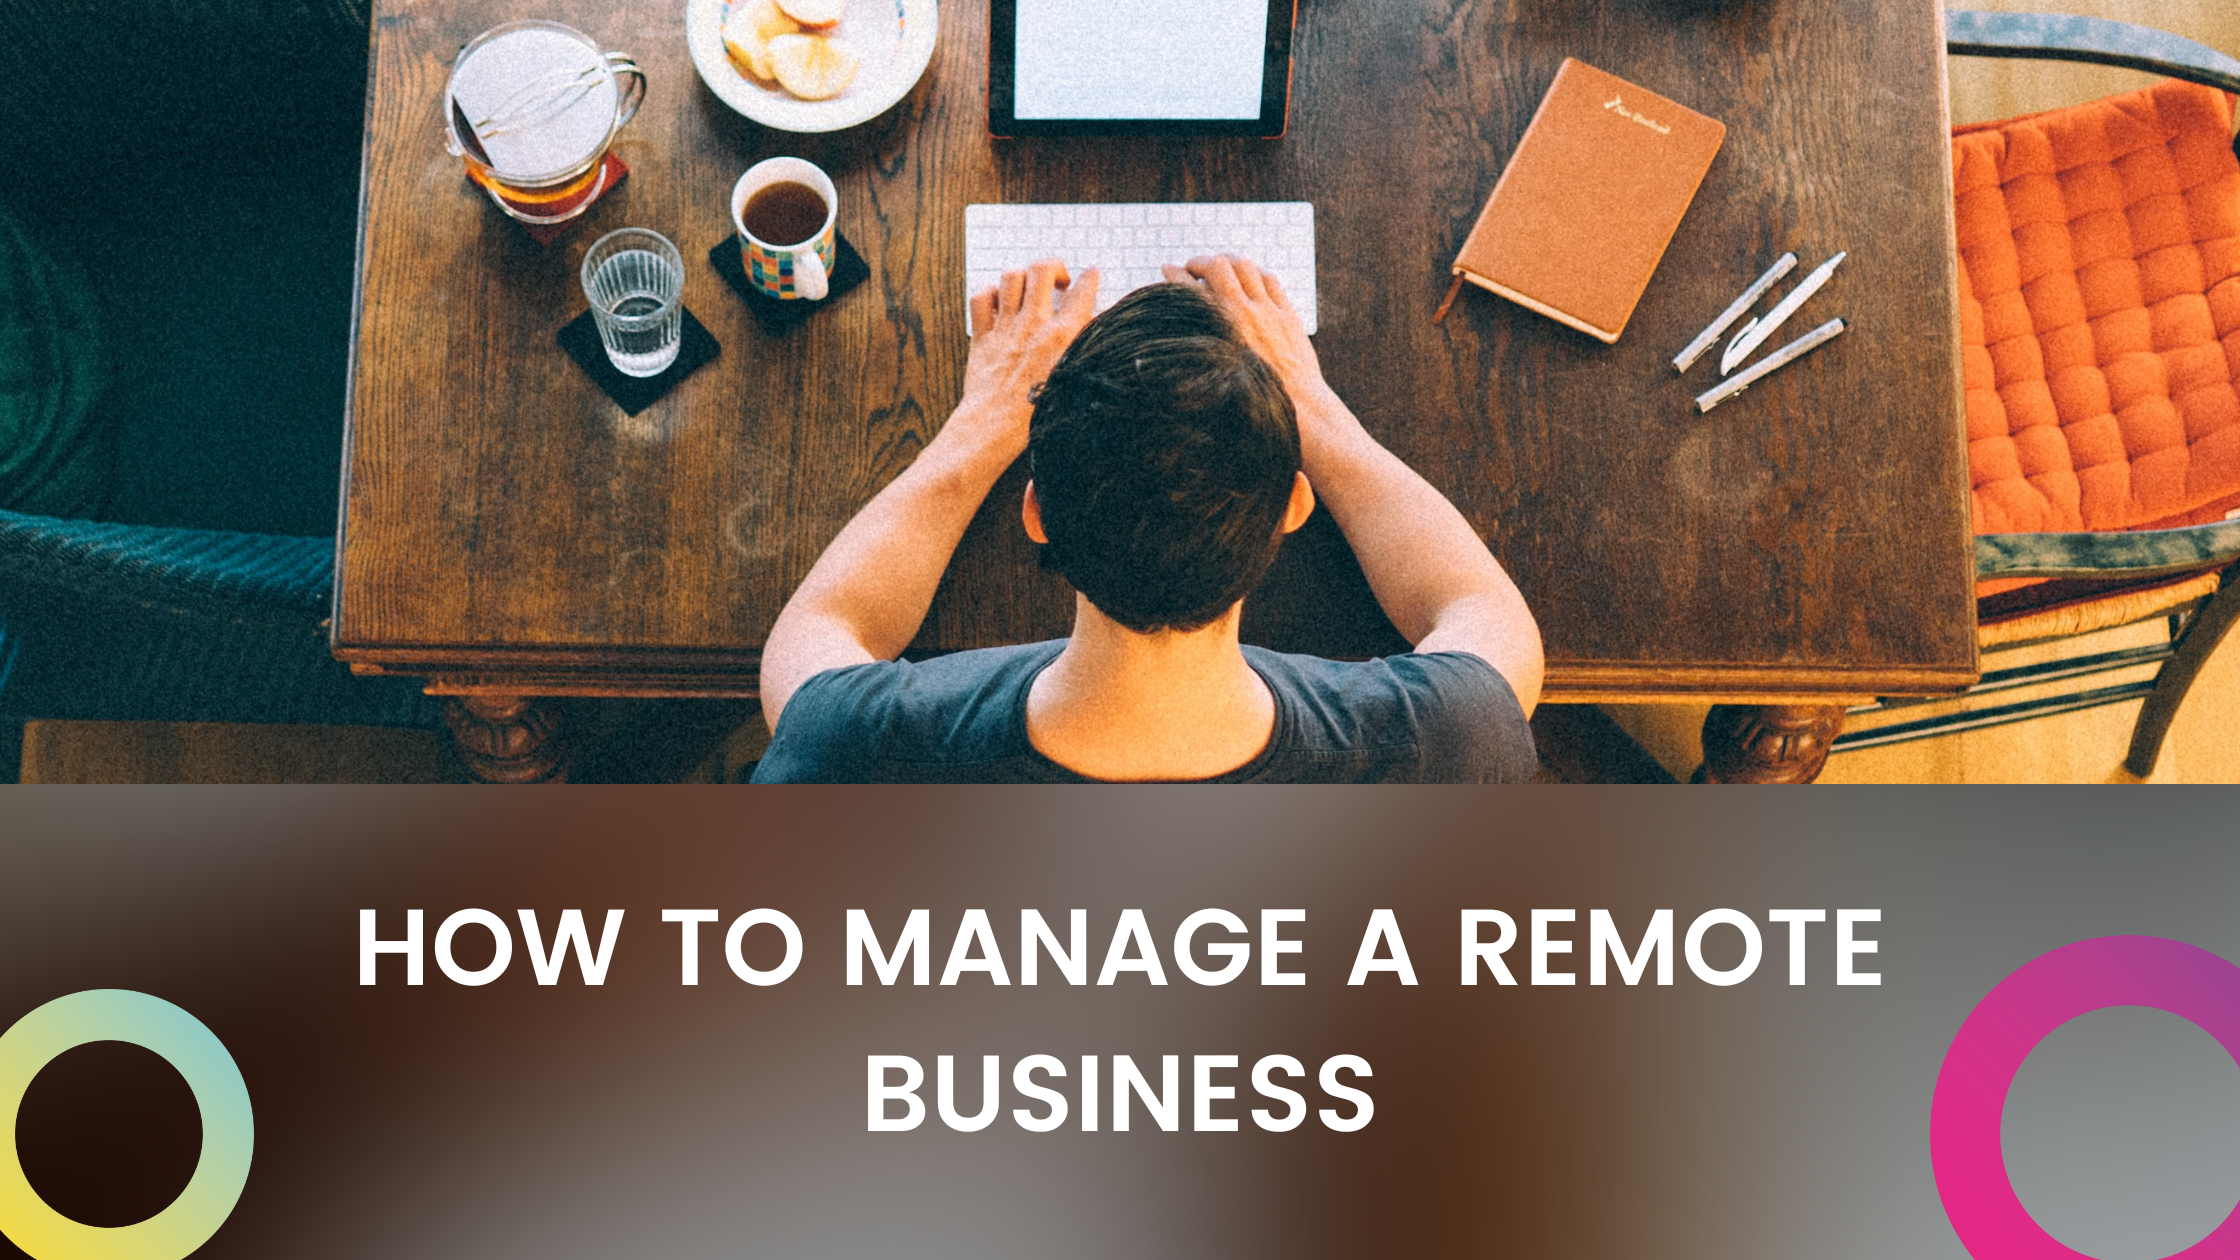 How to manage a remote business